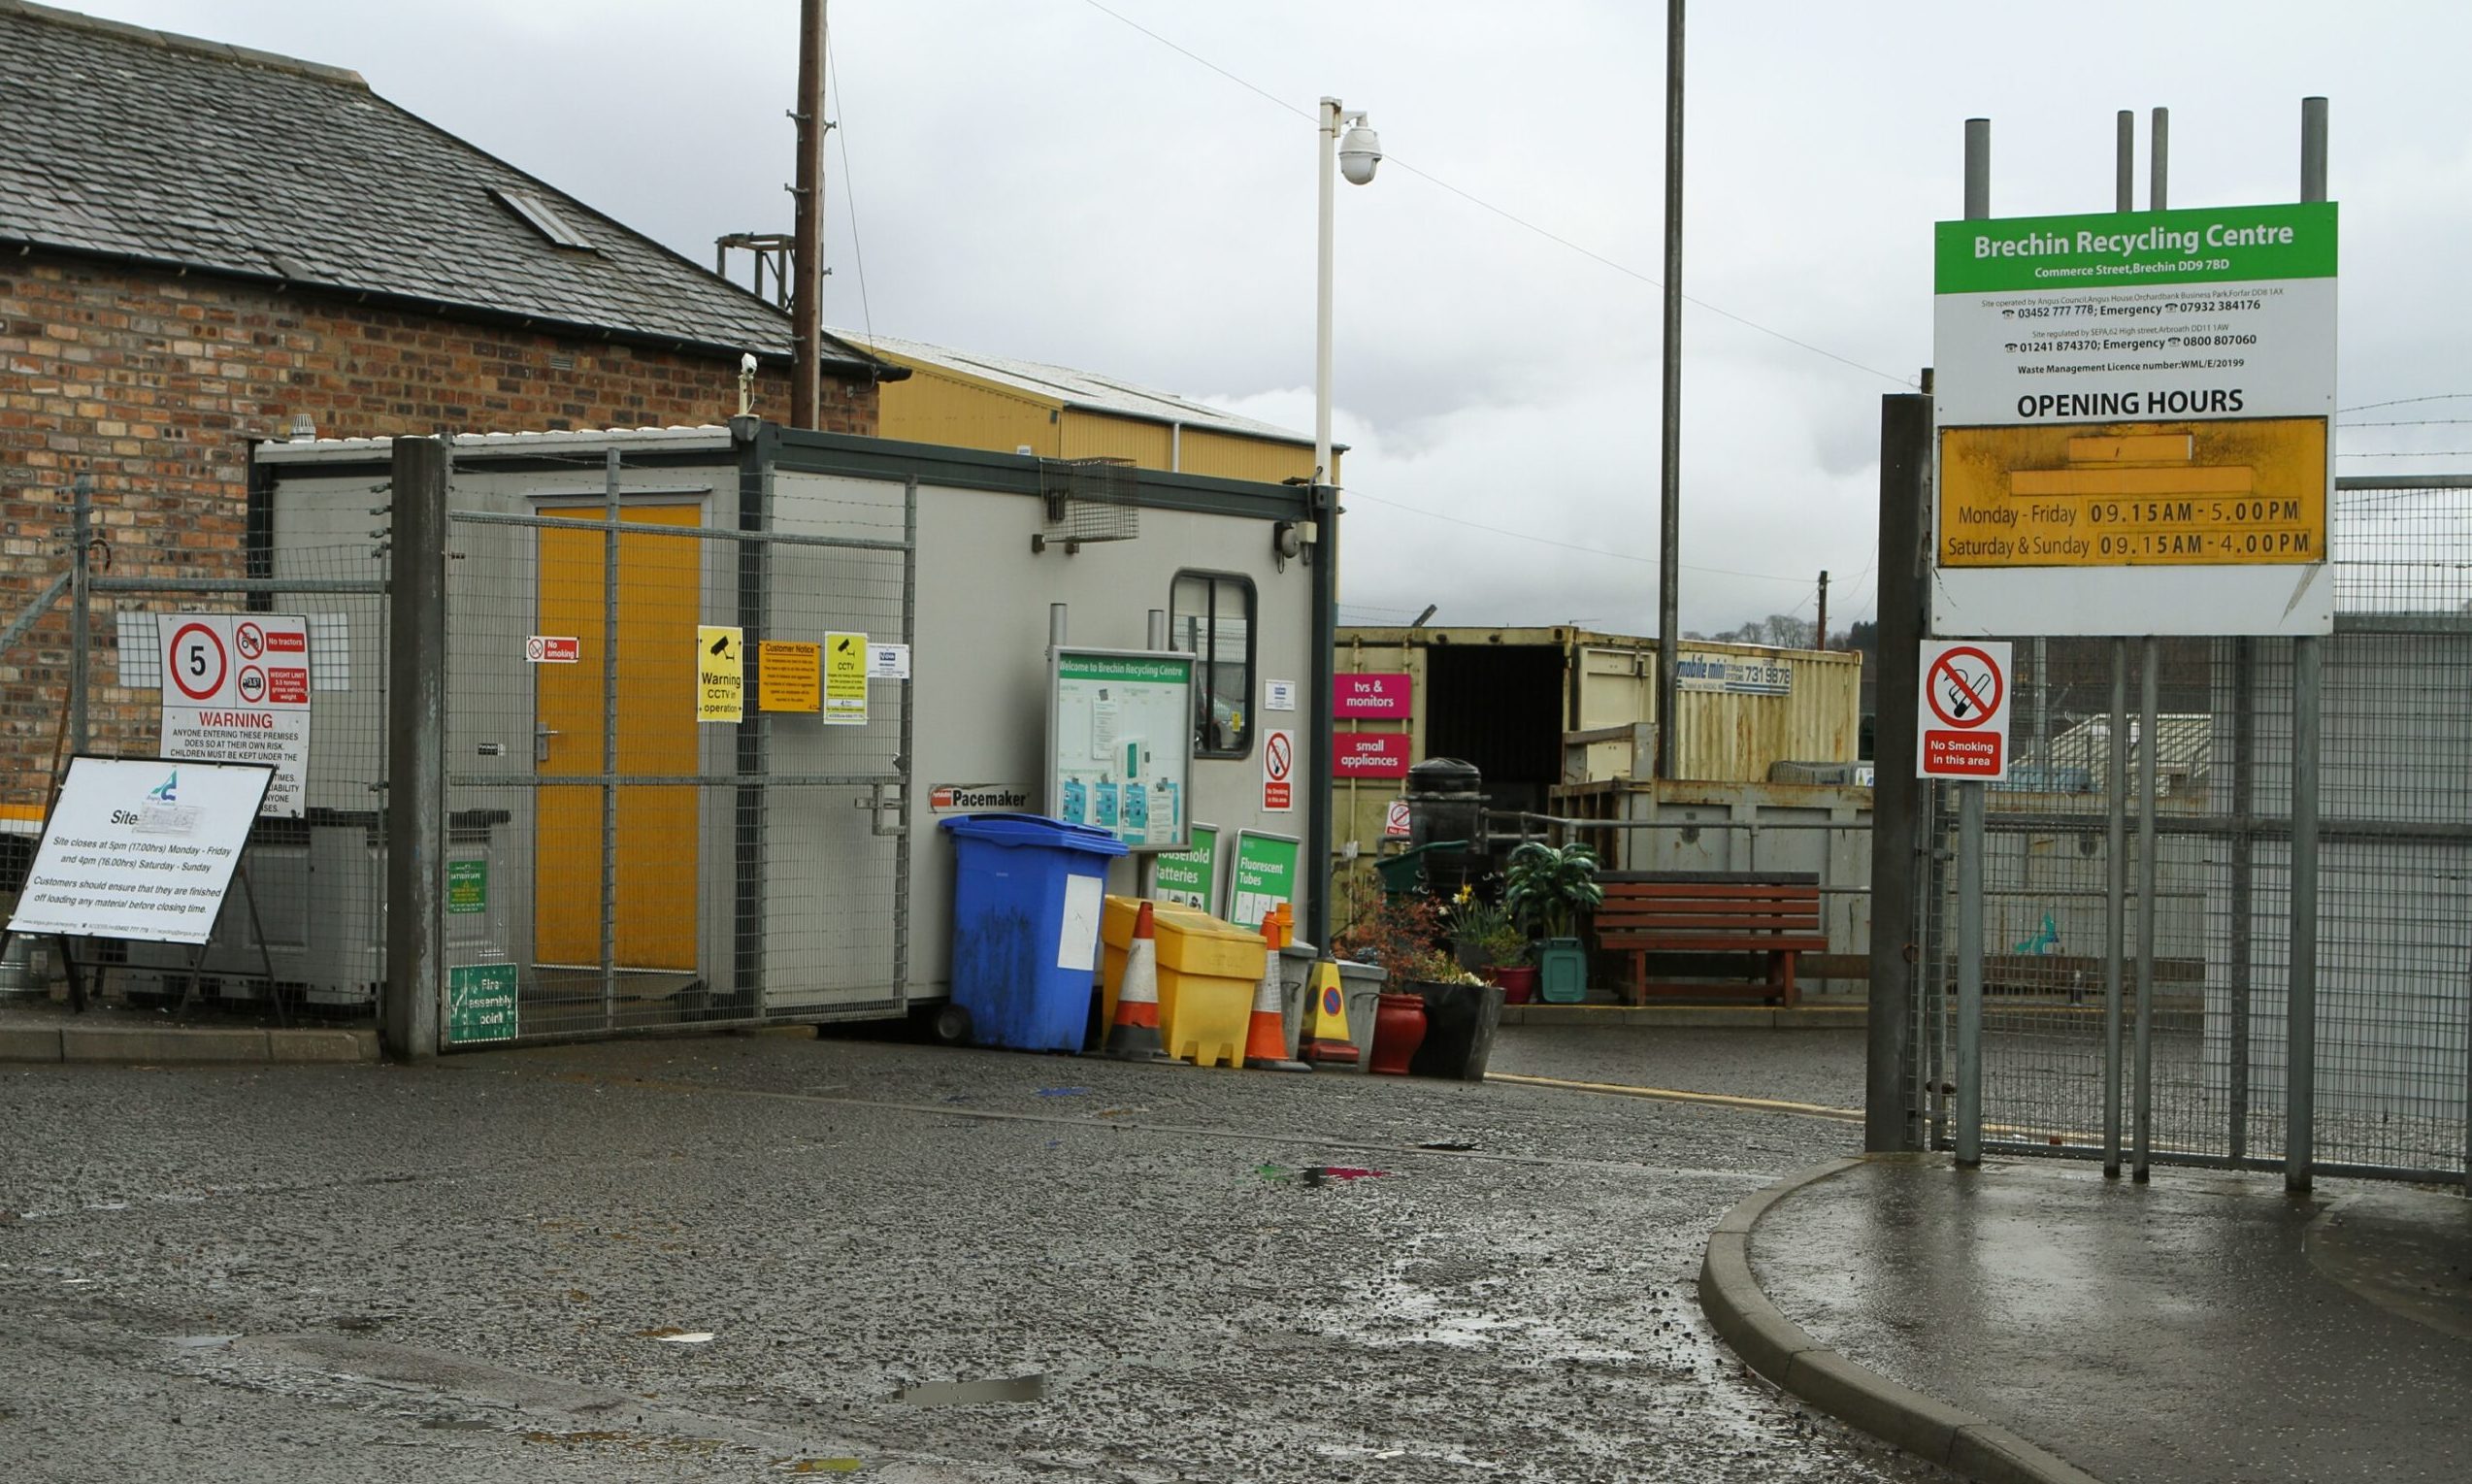 Brechin recycling centre.